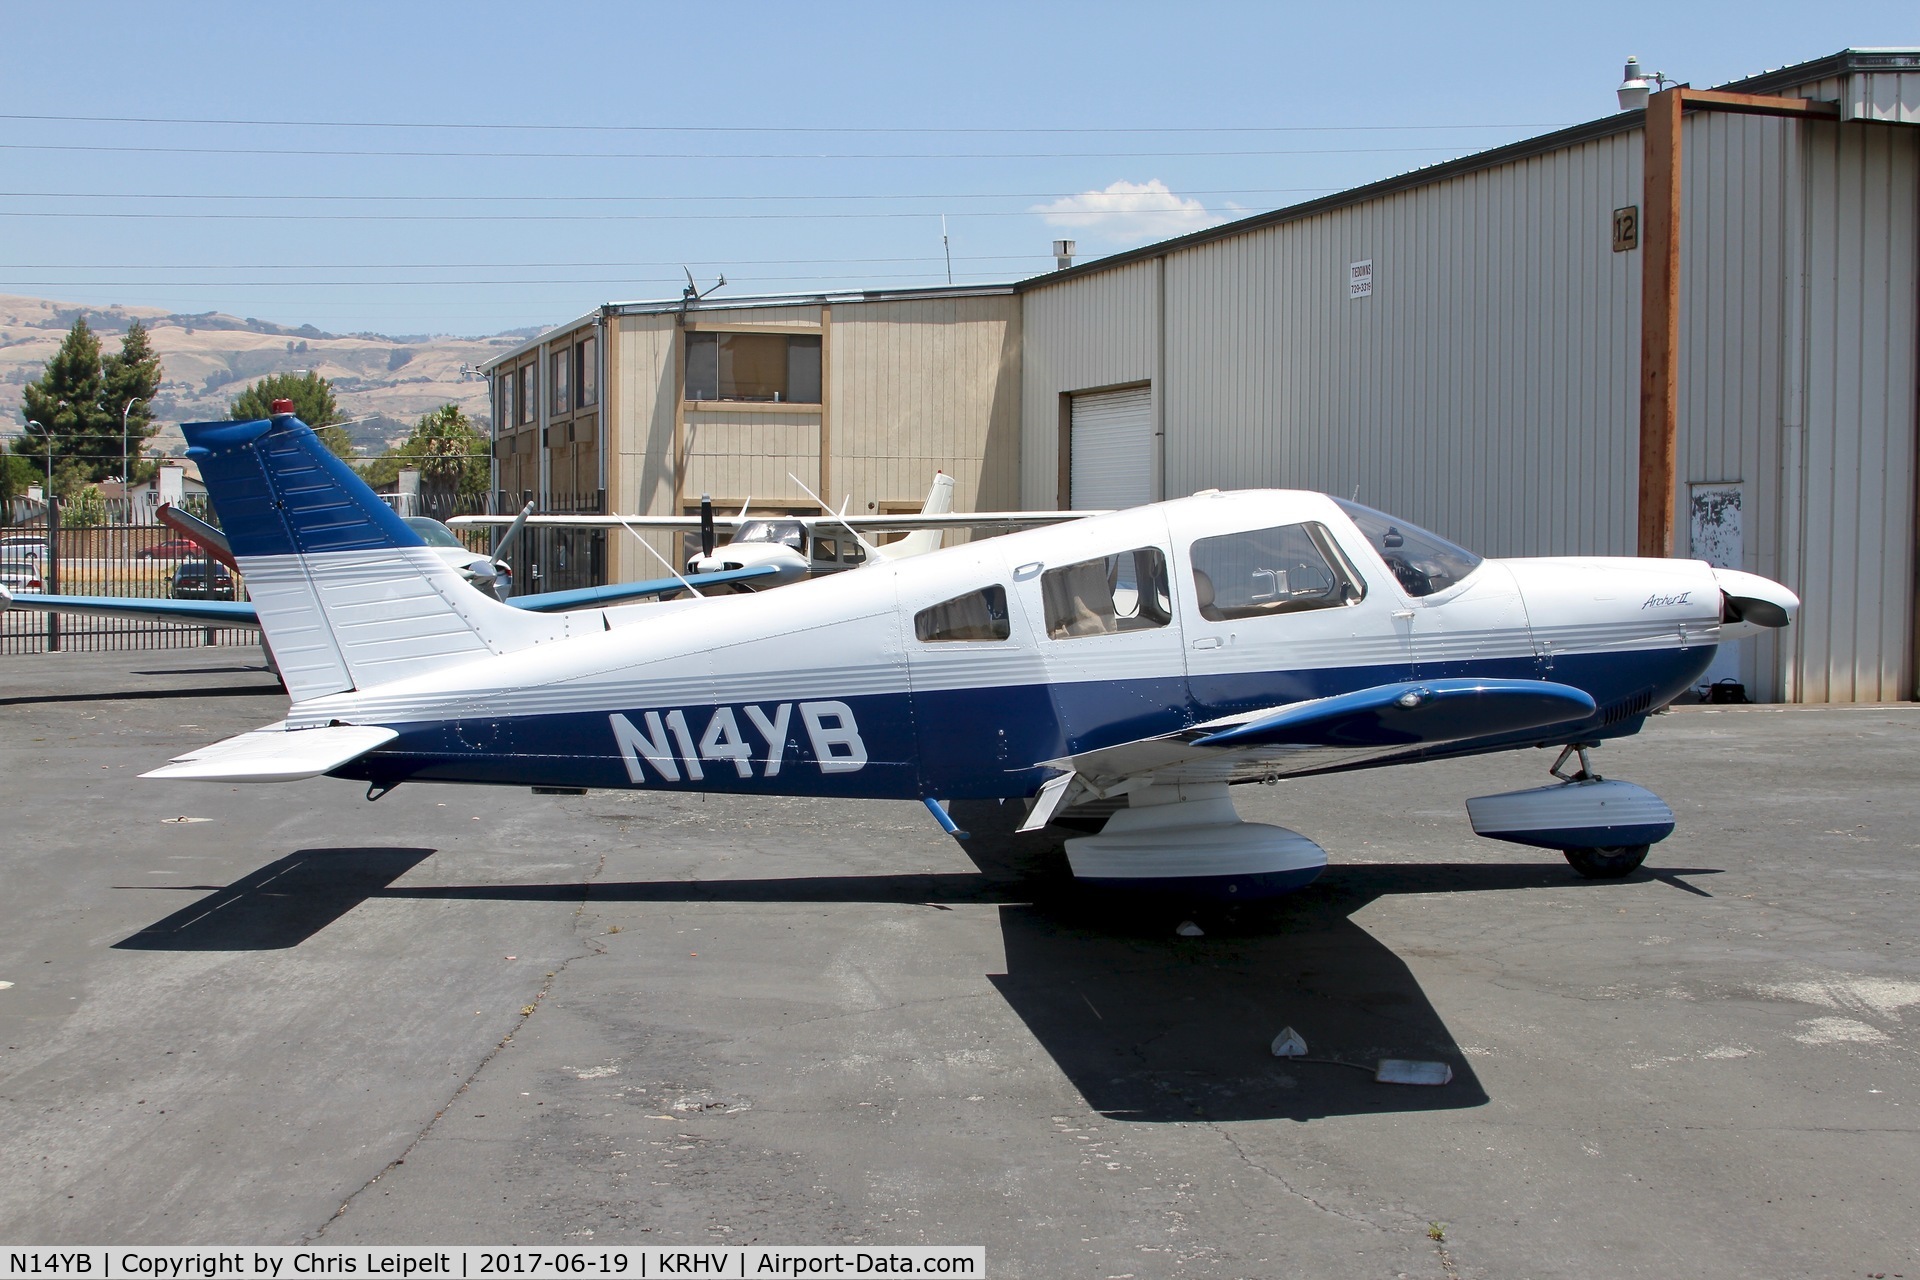 N14YB, 1979 Piper PA-28-181 C/N 28-7990461, 1979 Piper PA-28-181 for sale with LAS at Reid Hillview Airport, San Jose, CA.